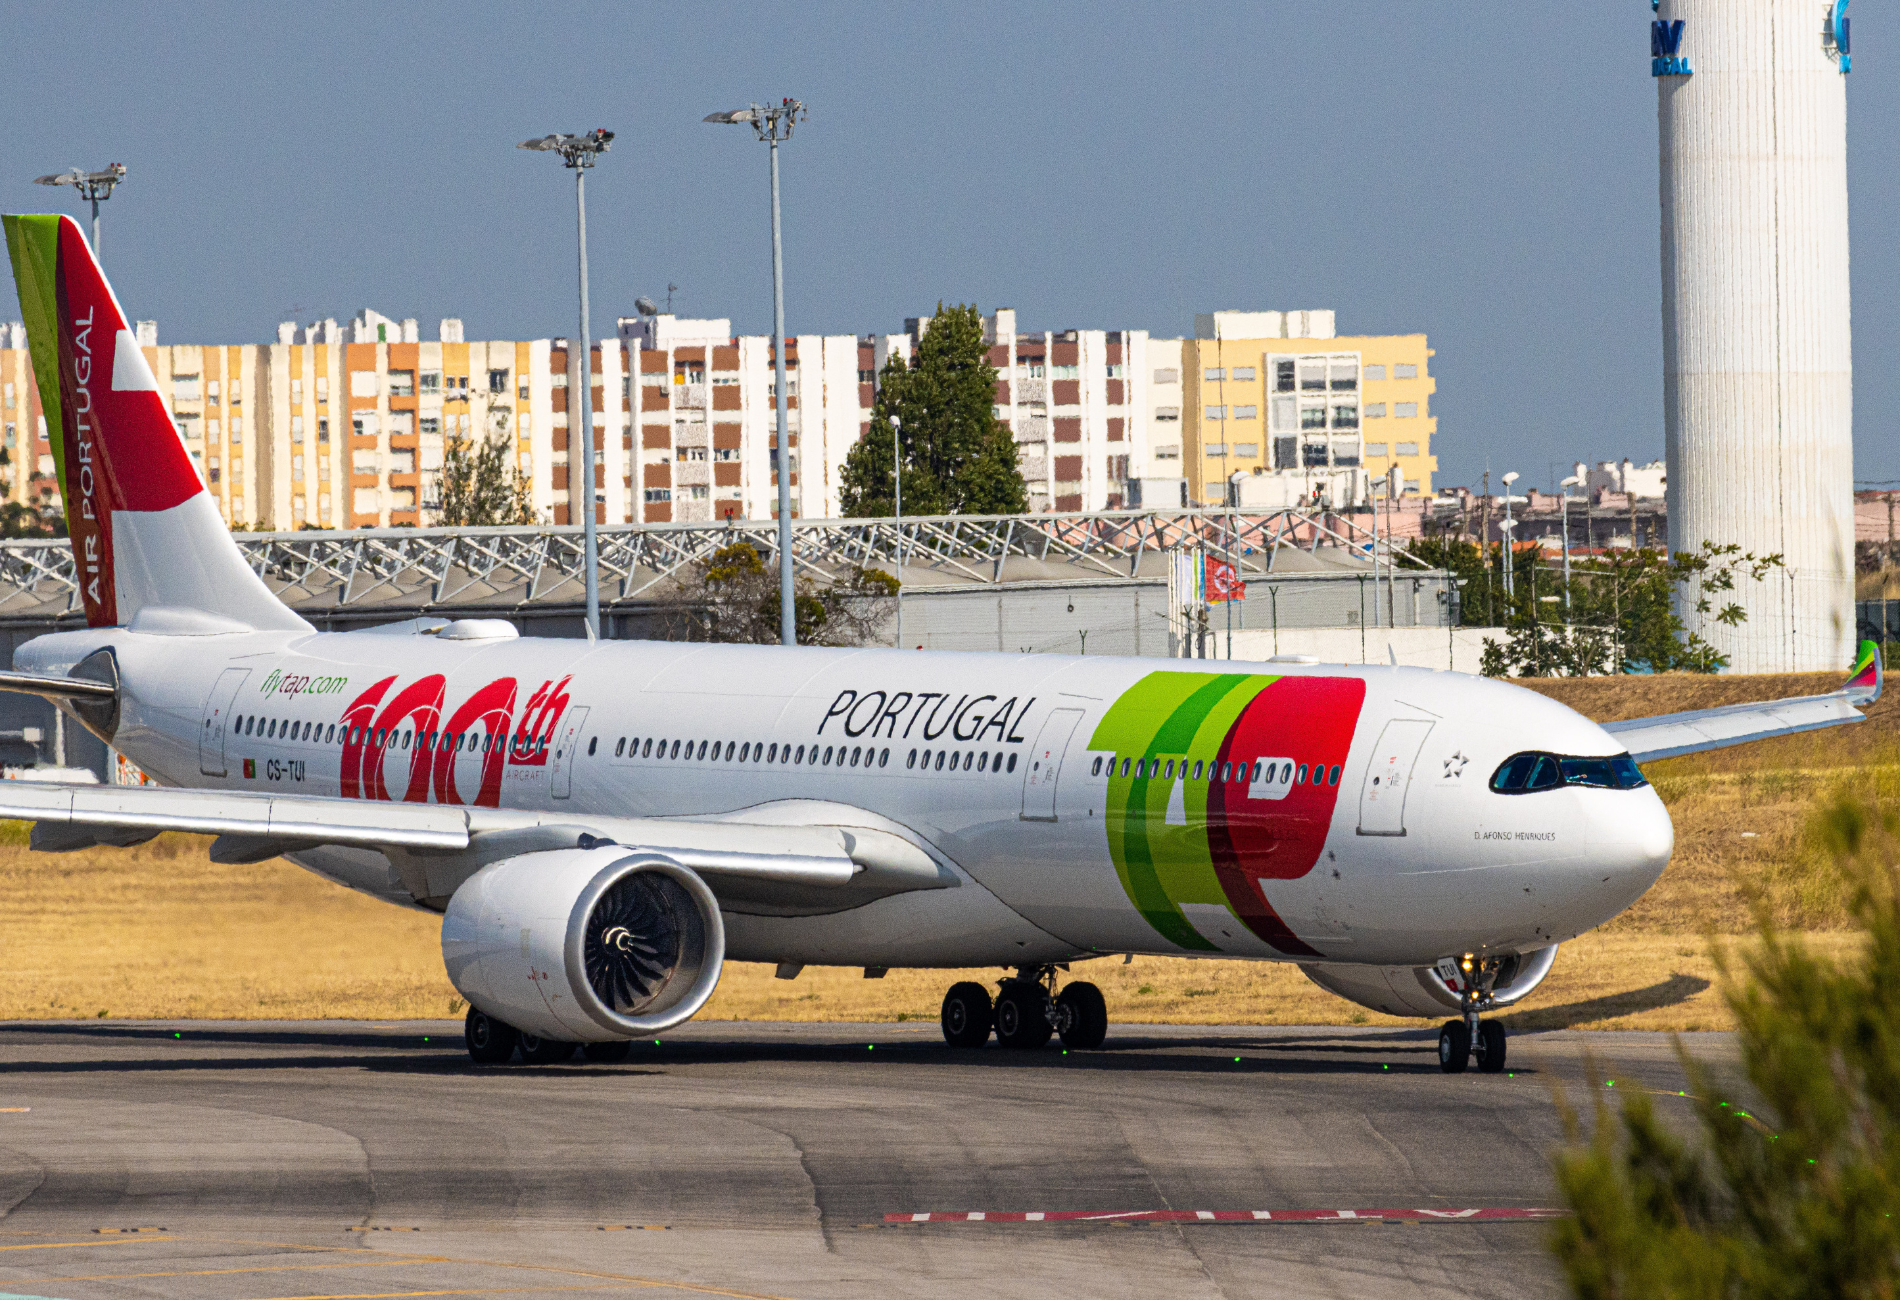 tap air portugal airplane on ground at airport for story on flight sales